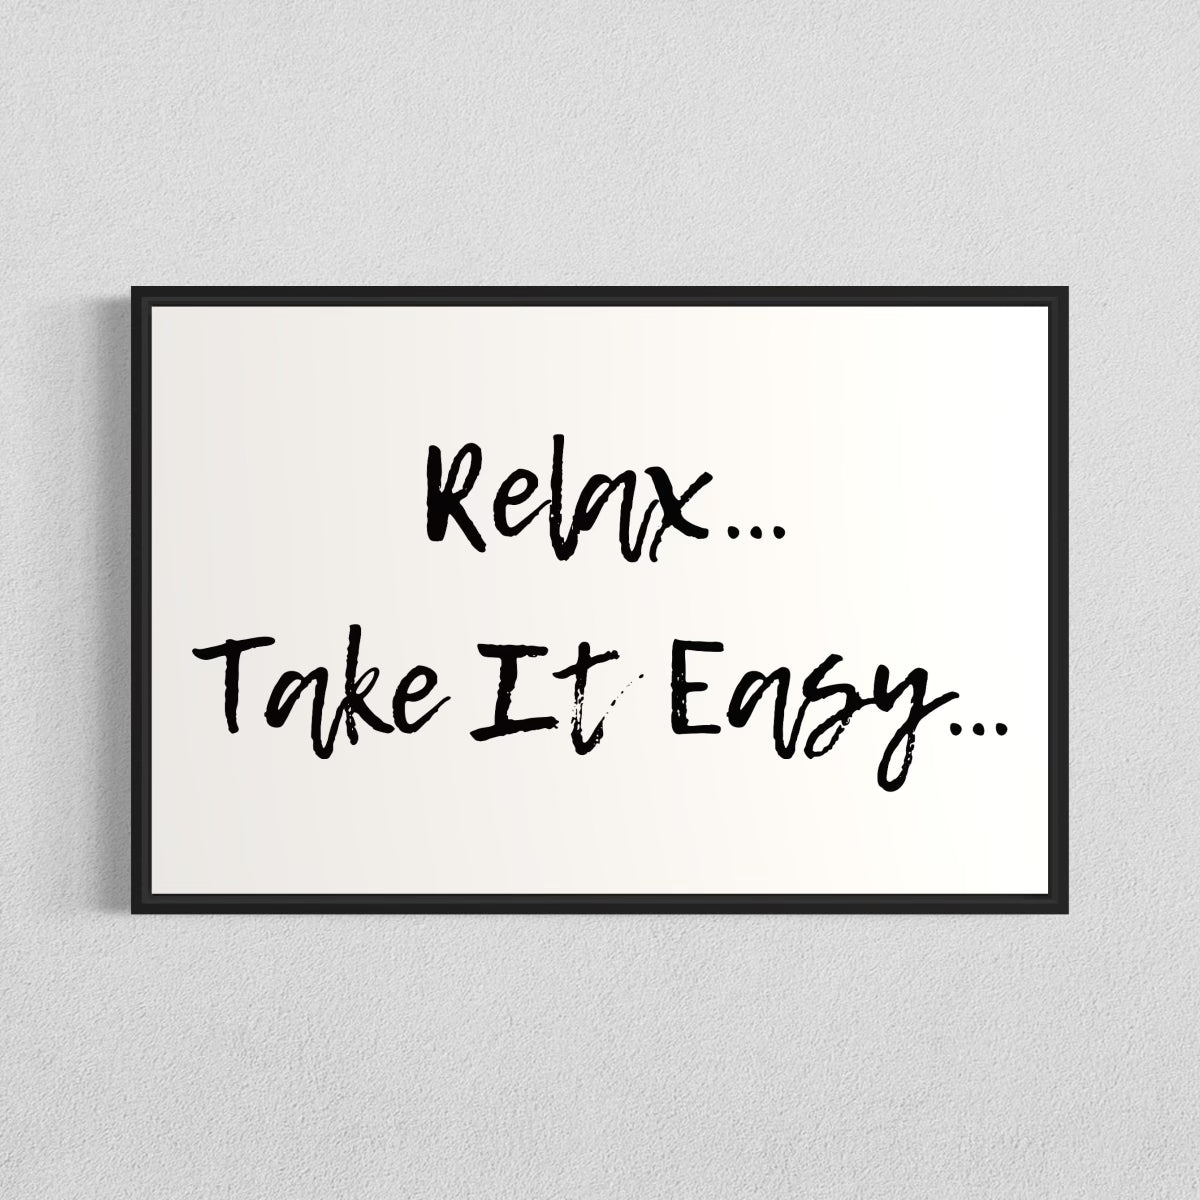 Relax... Take It Easy...